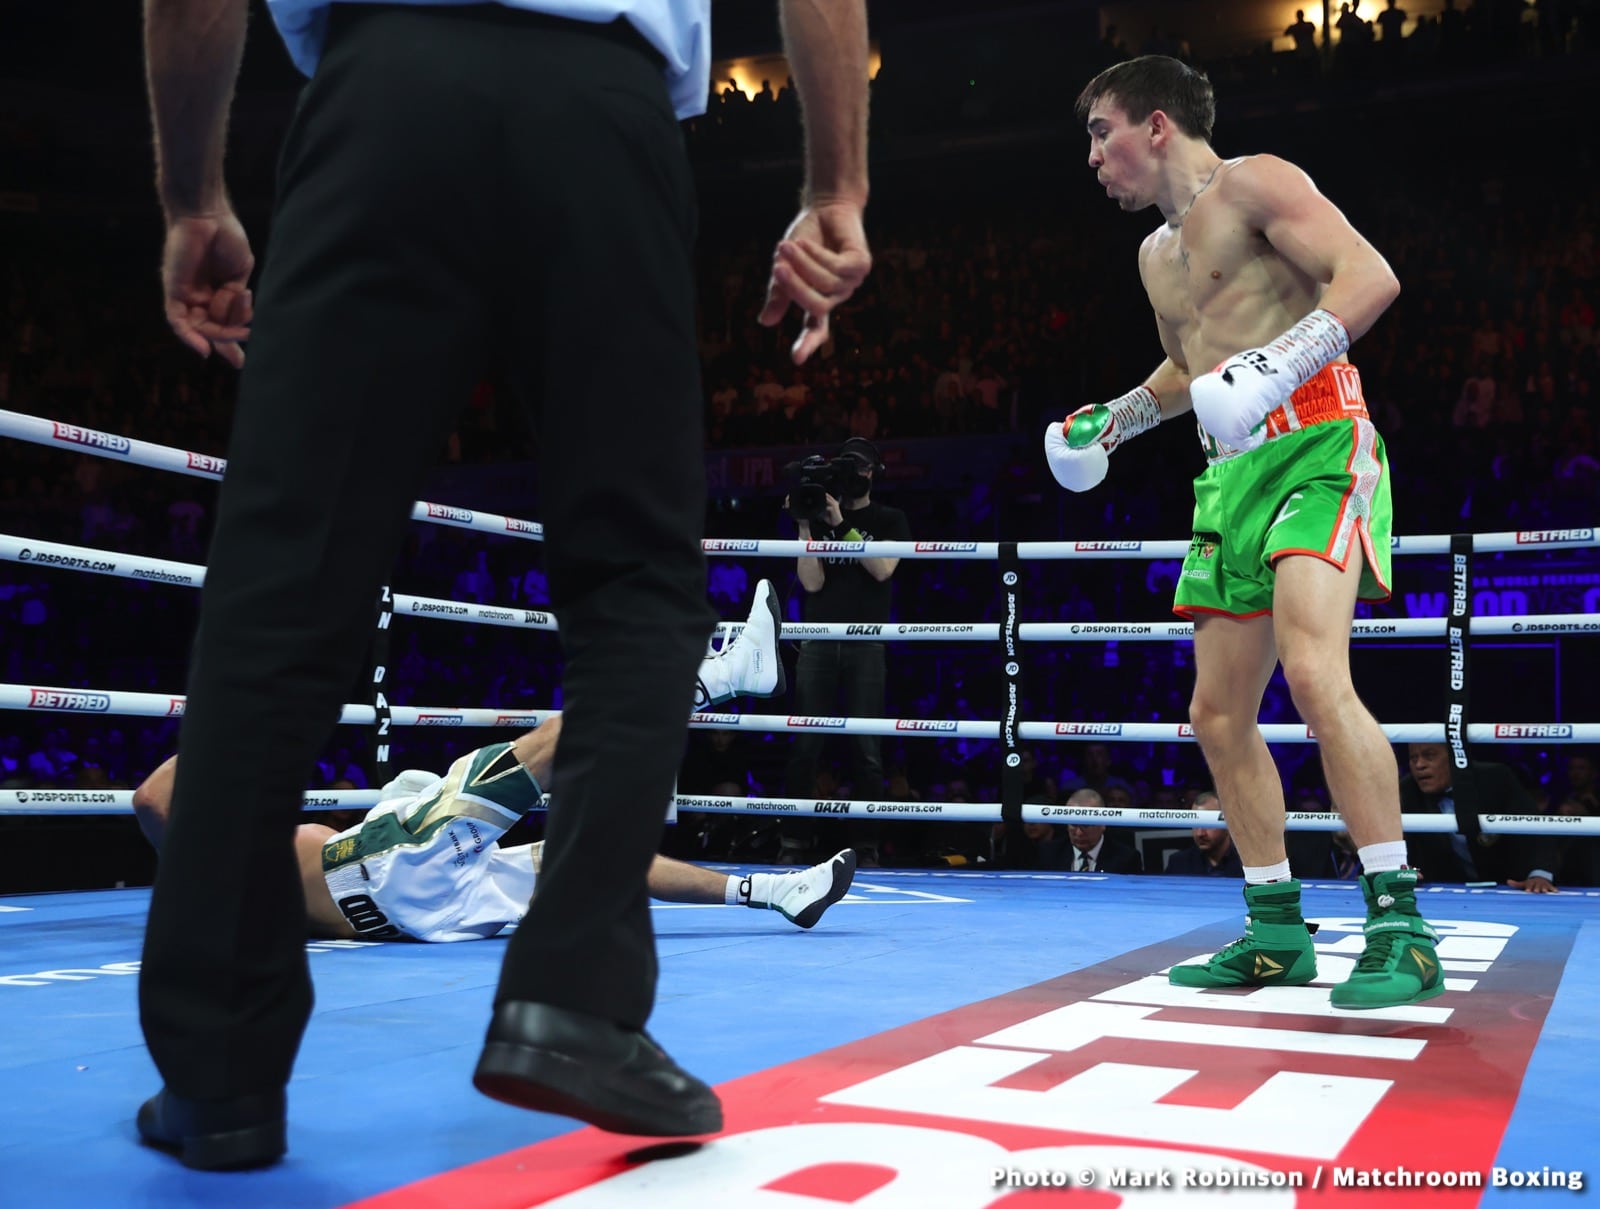 Leigh Wood's Astonishing Heroics In Epic War With Michael Conlan Should Turn Him Into A Genuine Star